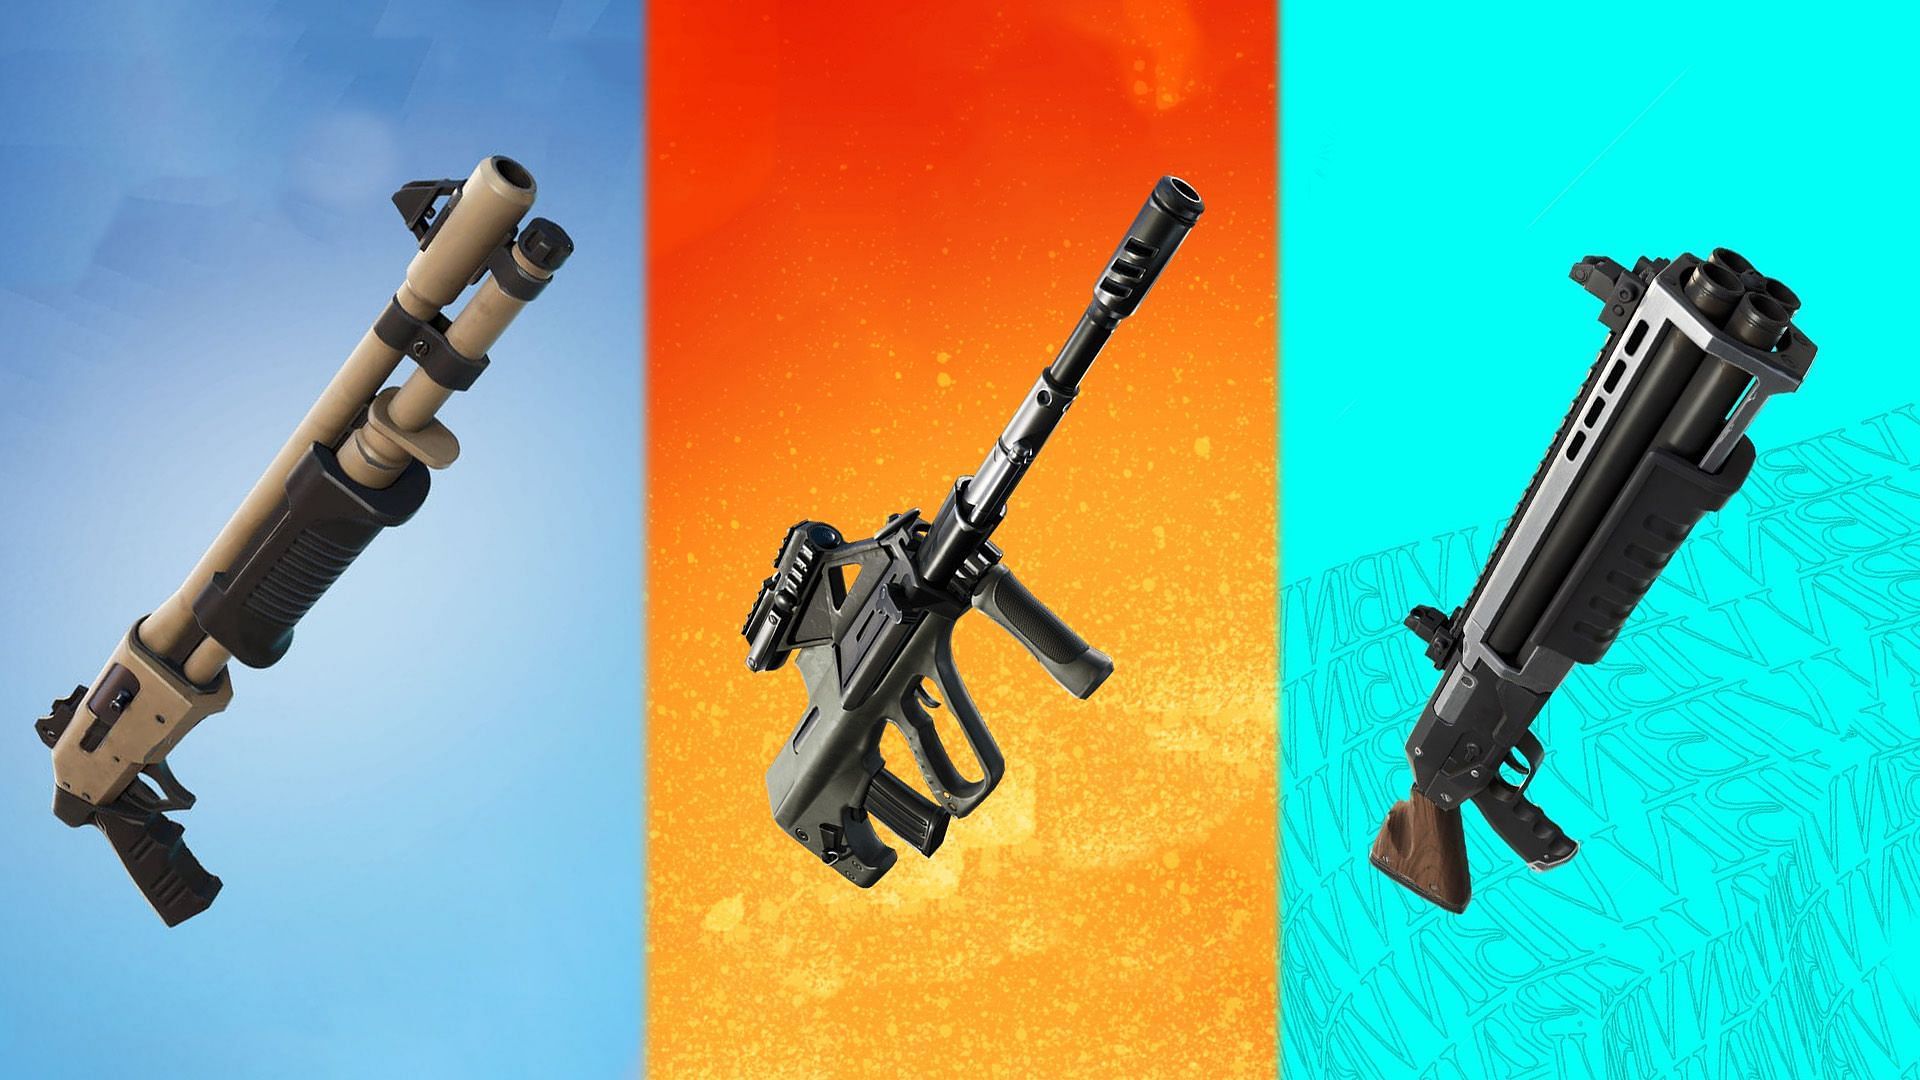 The latest Fortnite update has brought weapon balance changes (Image via Sportskeeda)